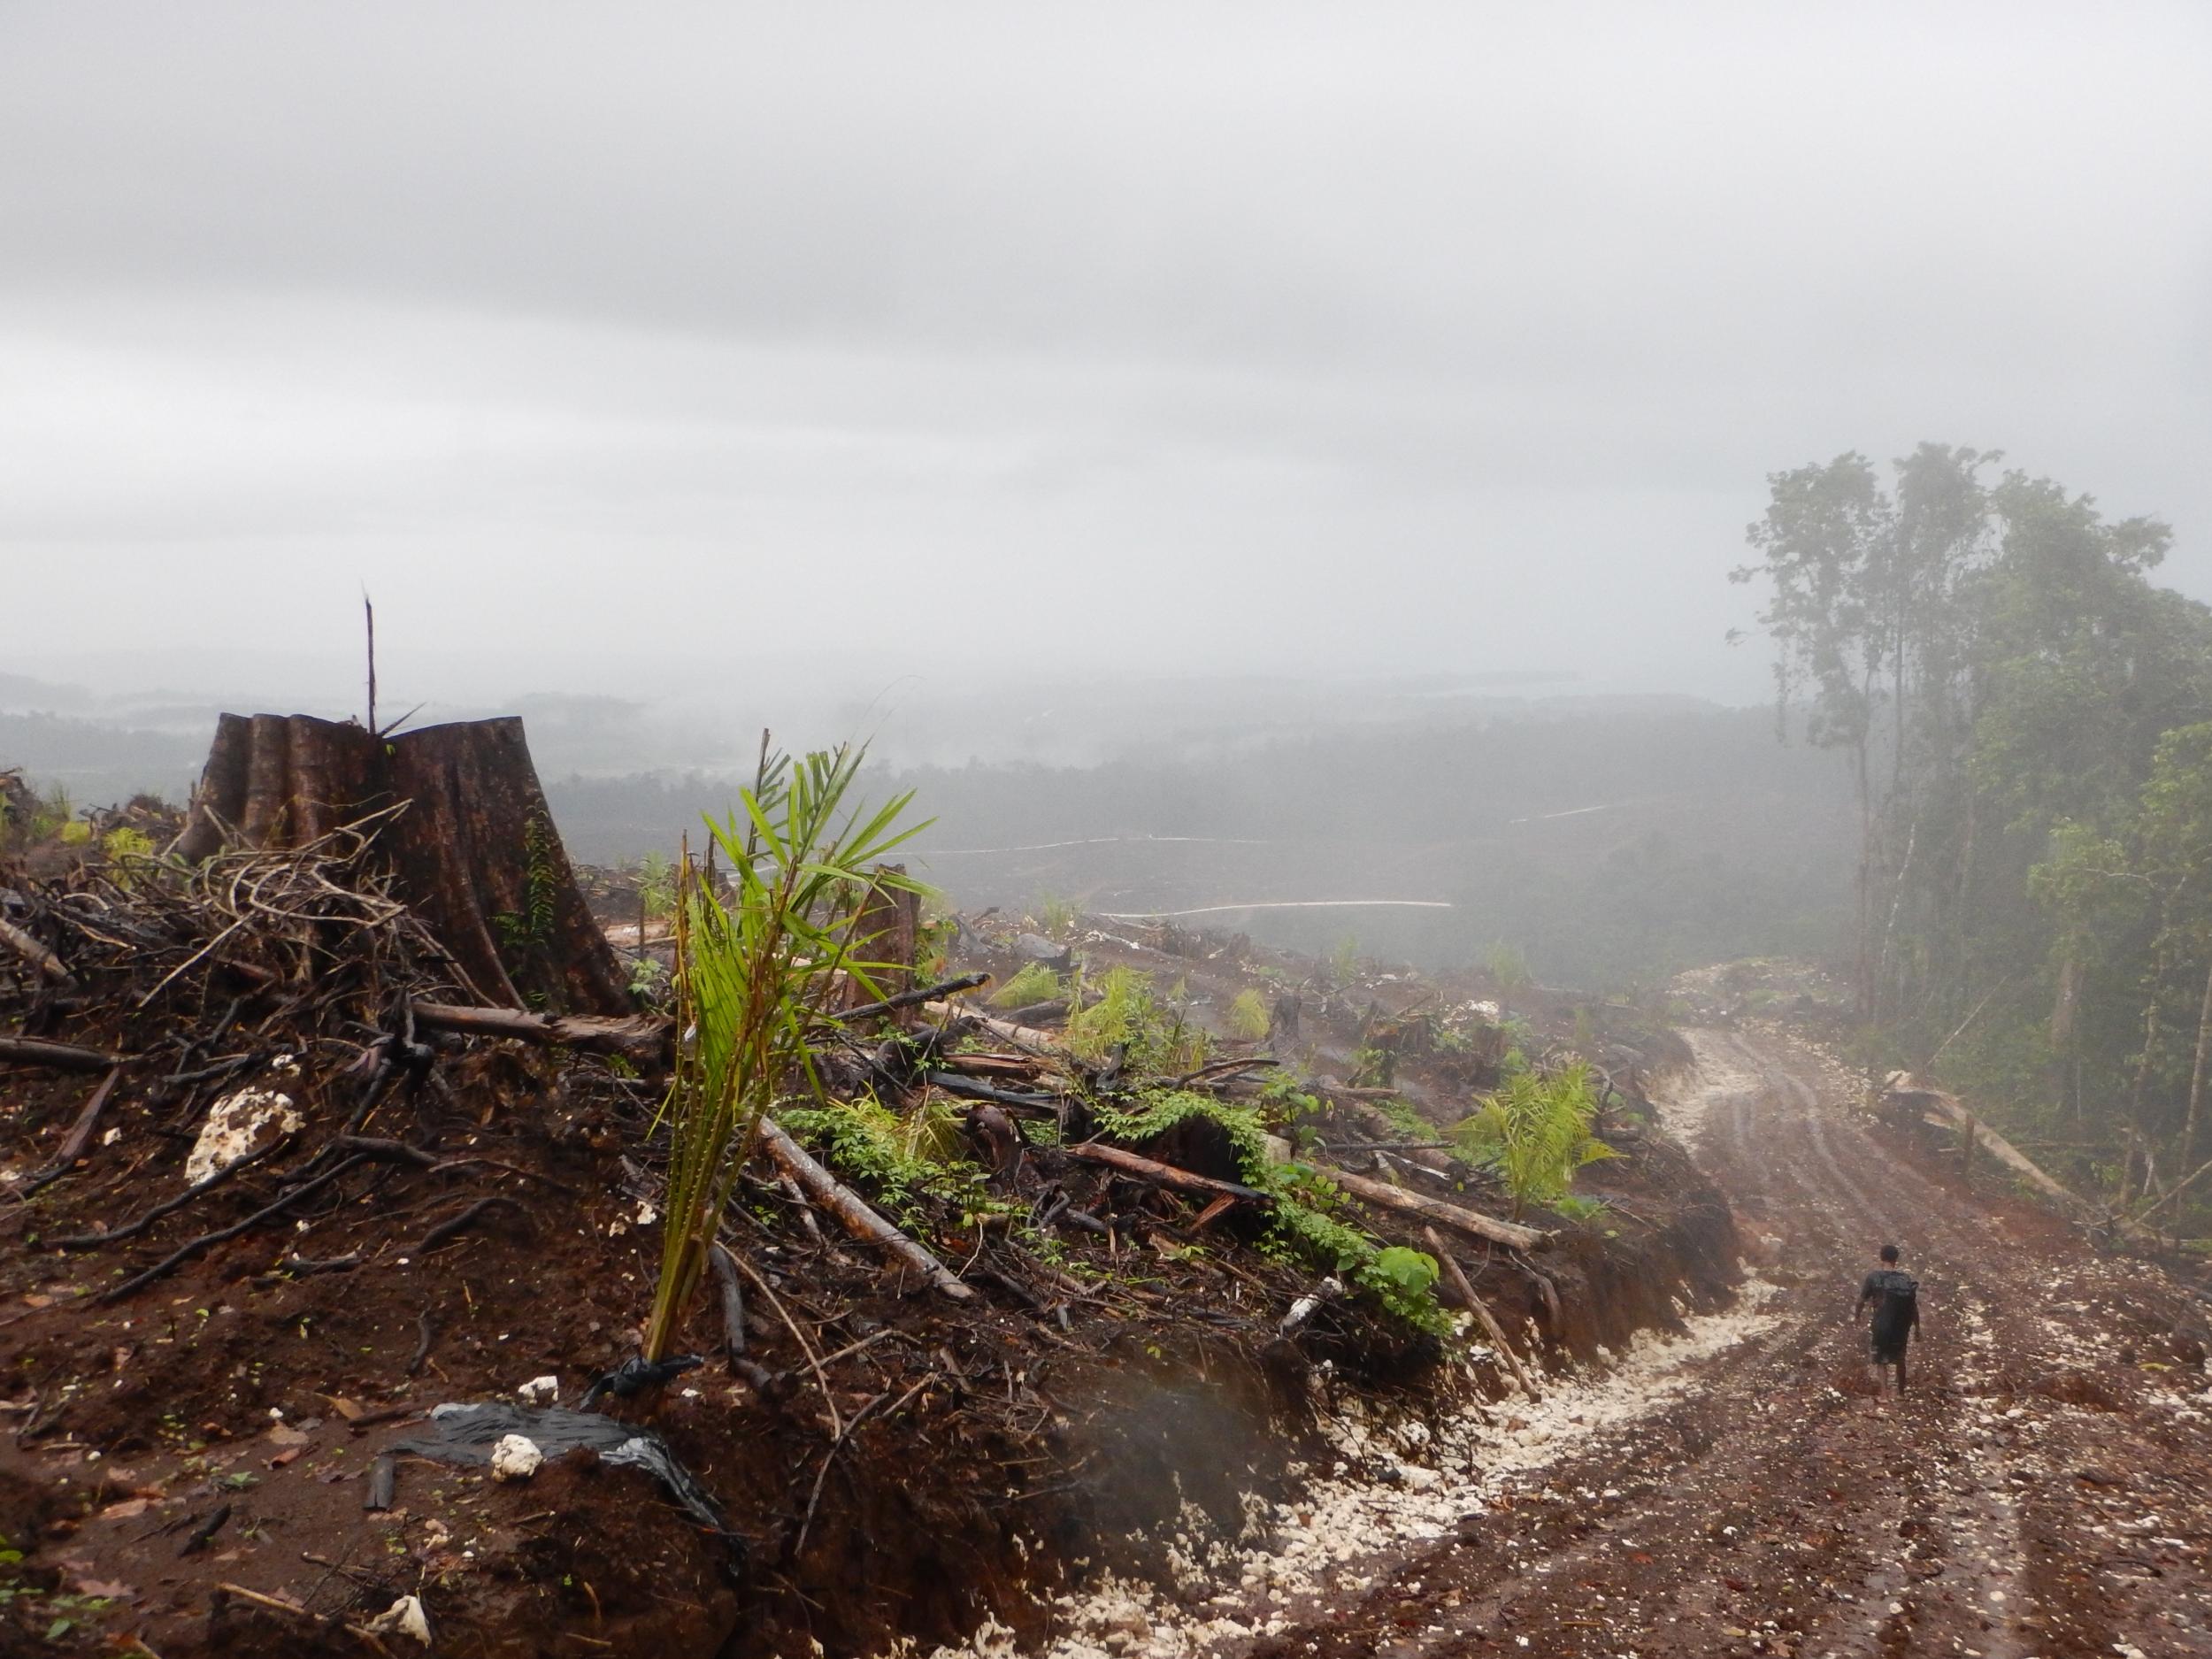 &#13;
Across the nation, tens of thousands of people are having their land stolen, often violently, and their rainforests destroyed for timber that is exported to China (Global Witness)&#13;